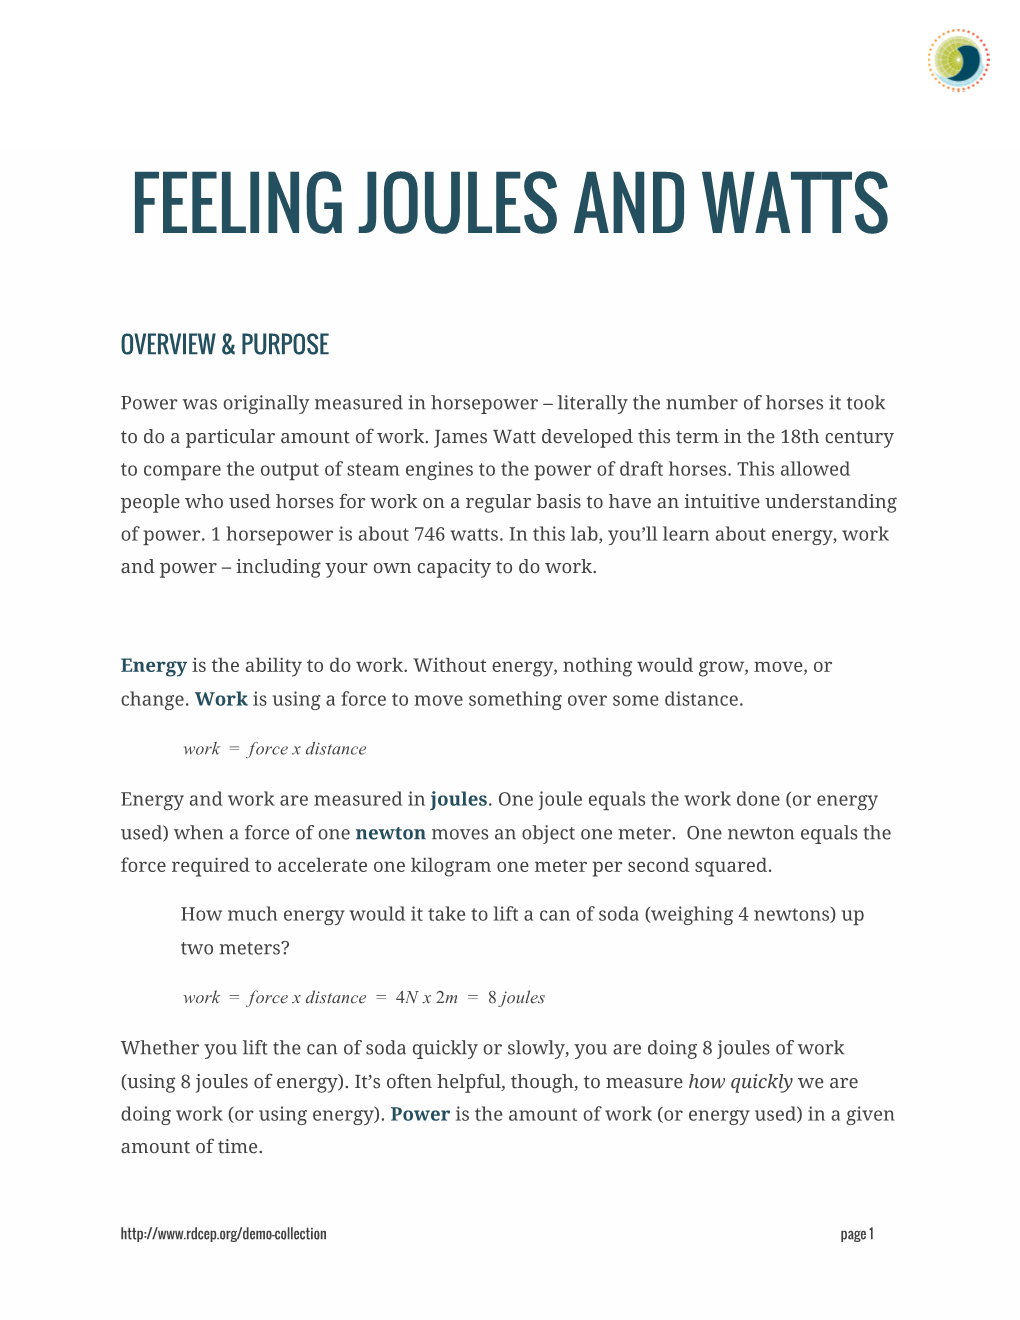 Feeling Joules and Watts